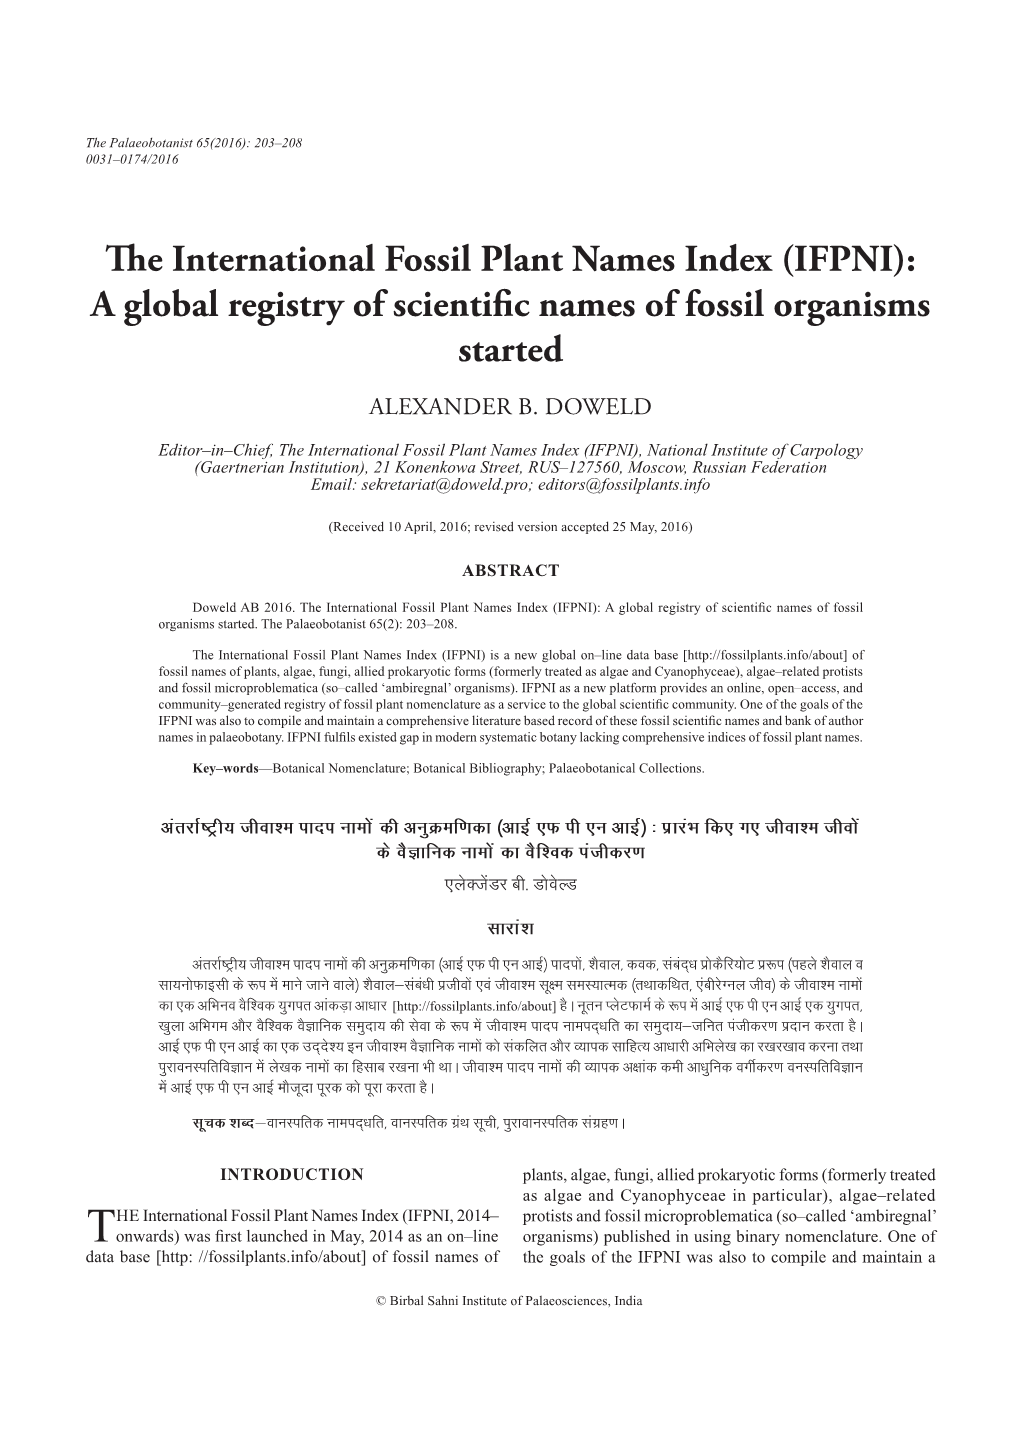 The International Fossil Plant Names Index (IFPNI): a Global Registry of Scientific Names of Fossil Organisms Started